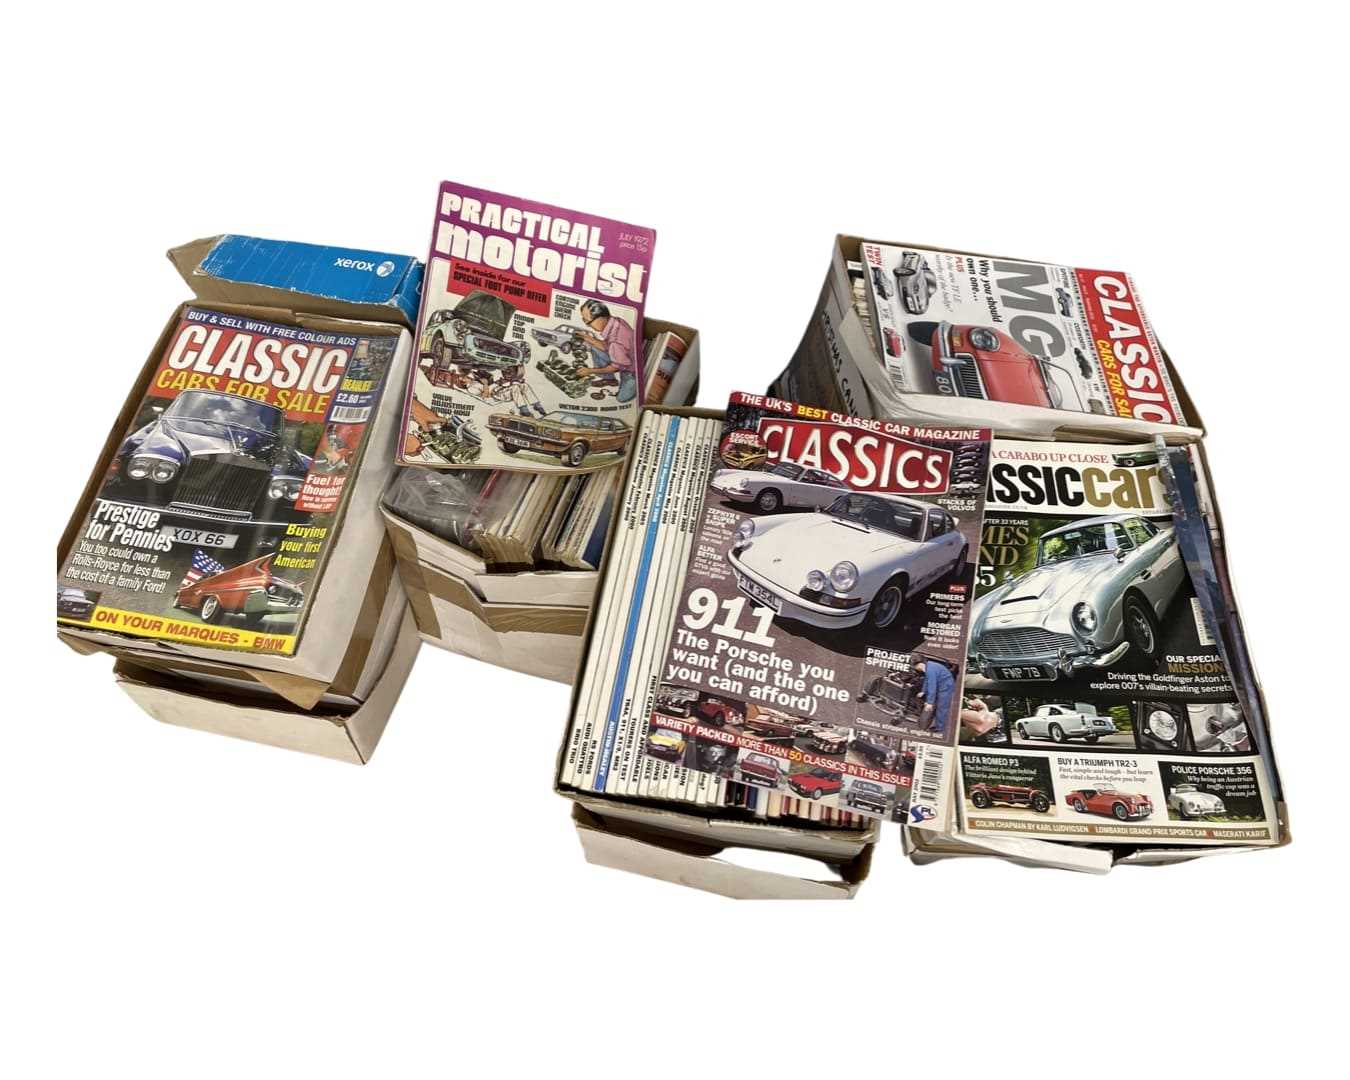 Large lot of approximately 195 Classic Car magazines including some issues from the following